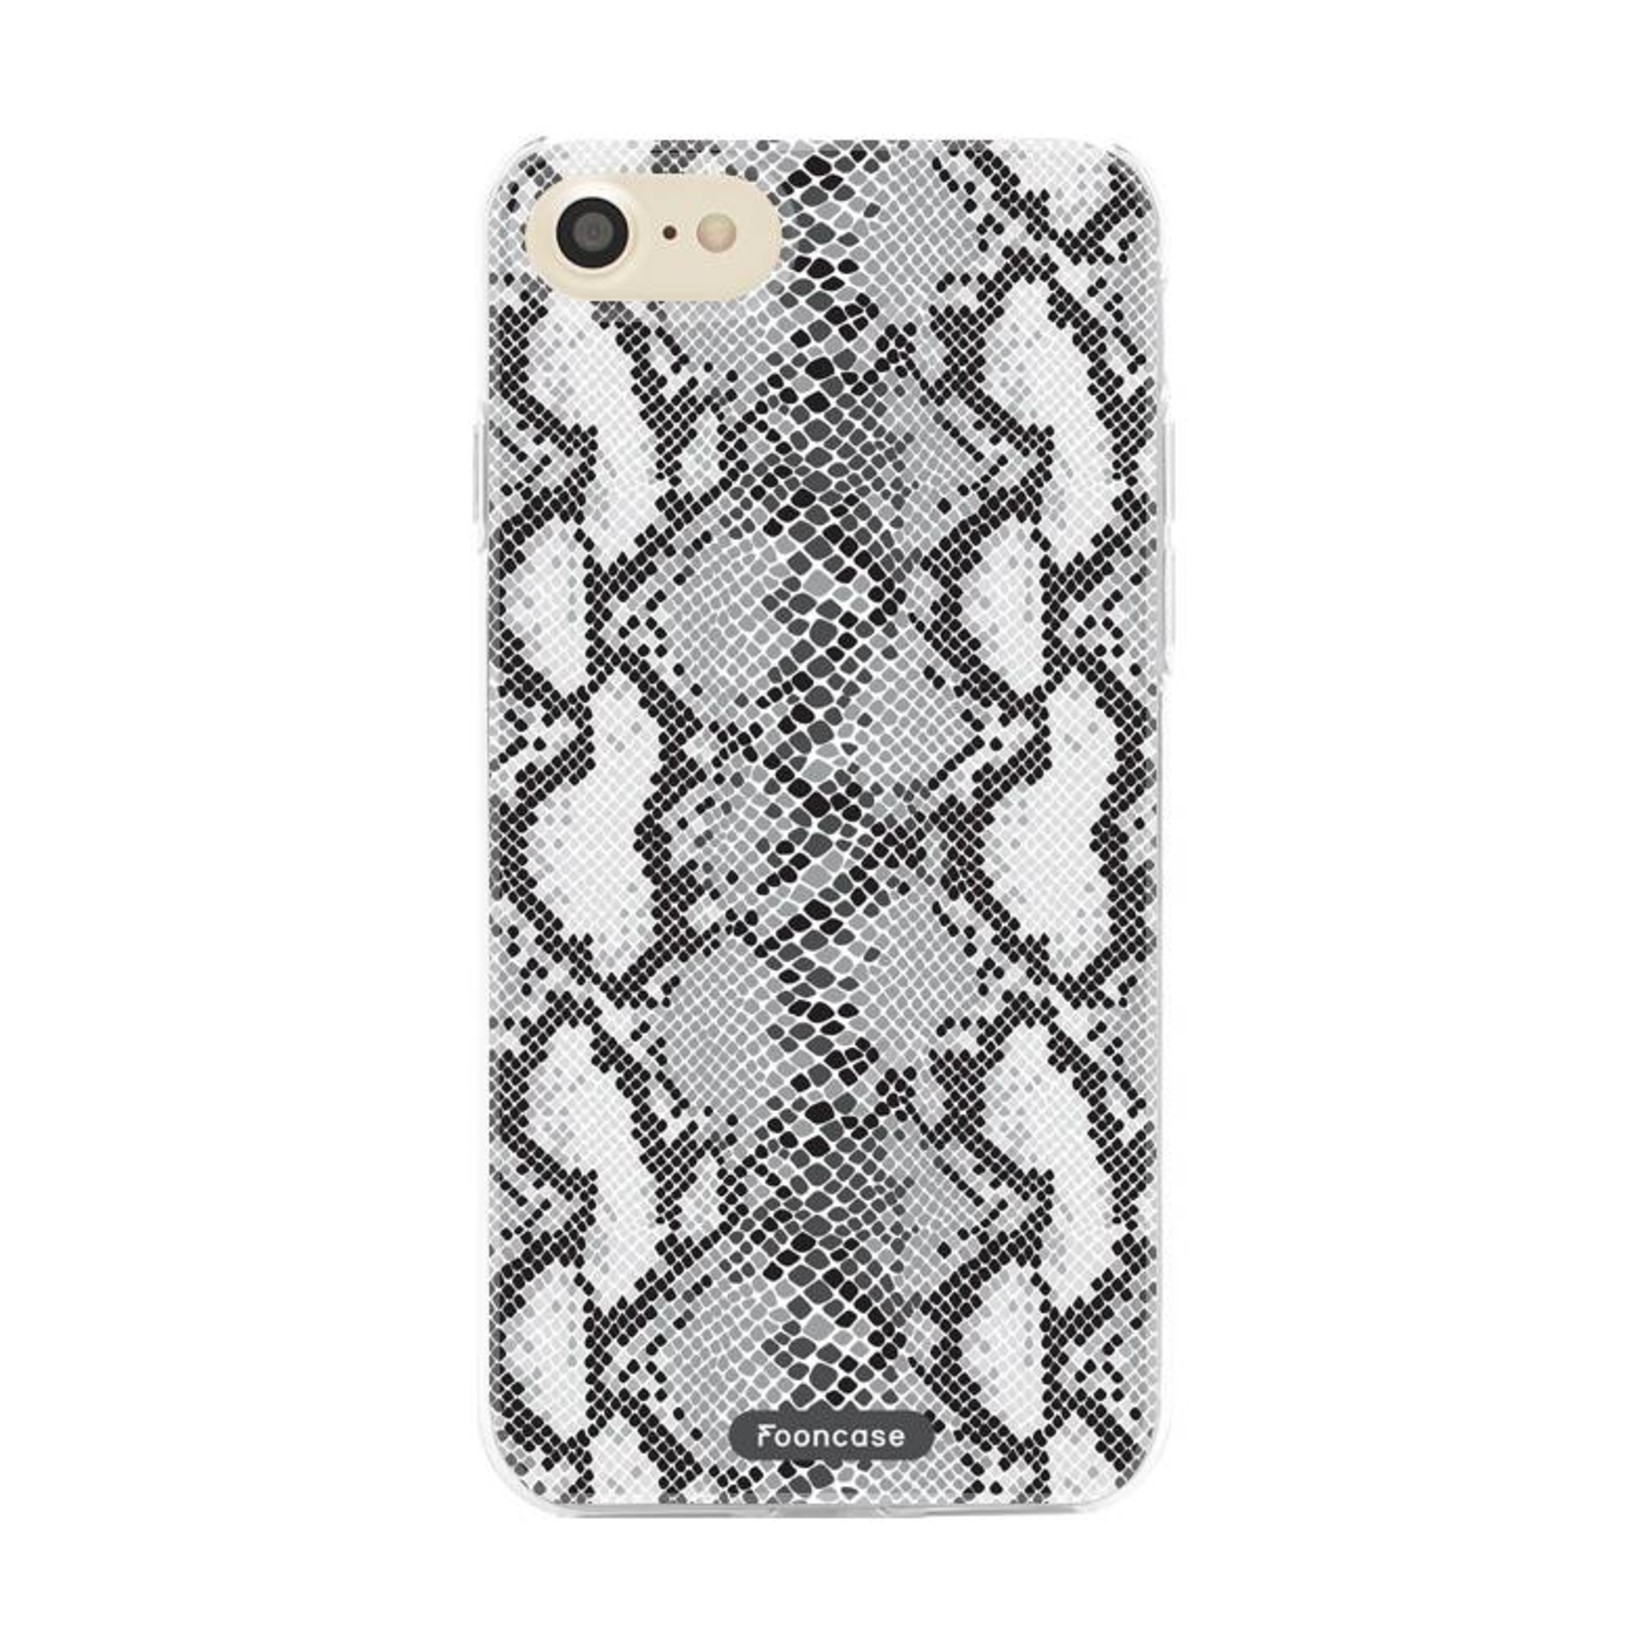 FOONCASE Iphone 8 Cover - Snake it!